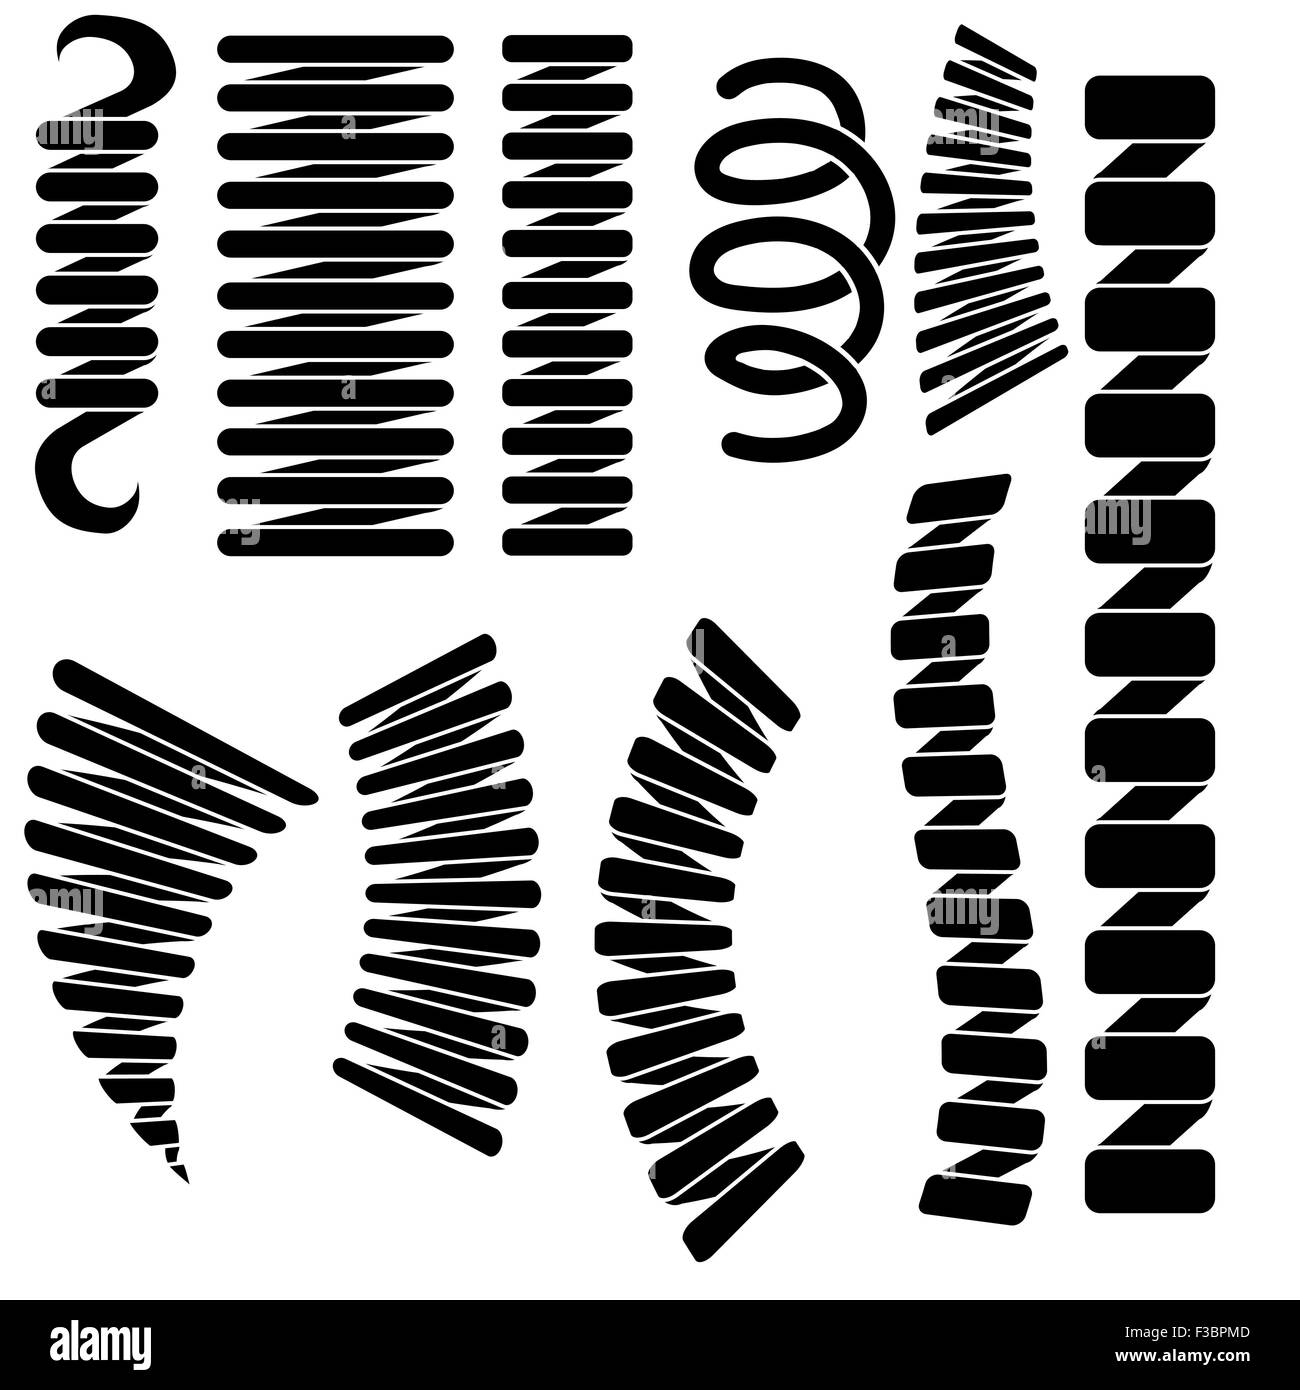 Set of Springs Silhouettes Stock Vector